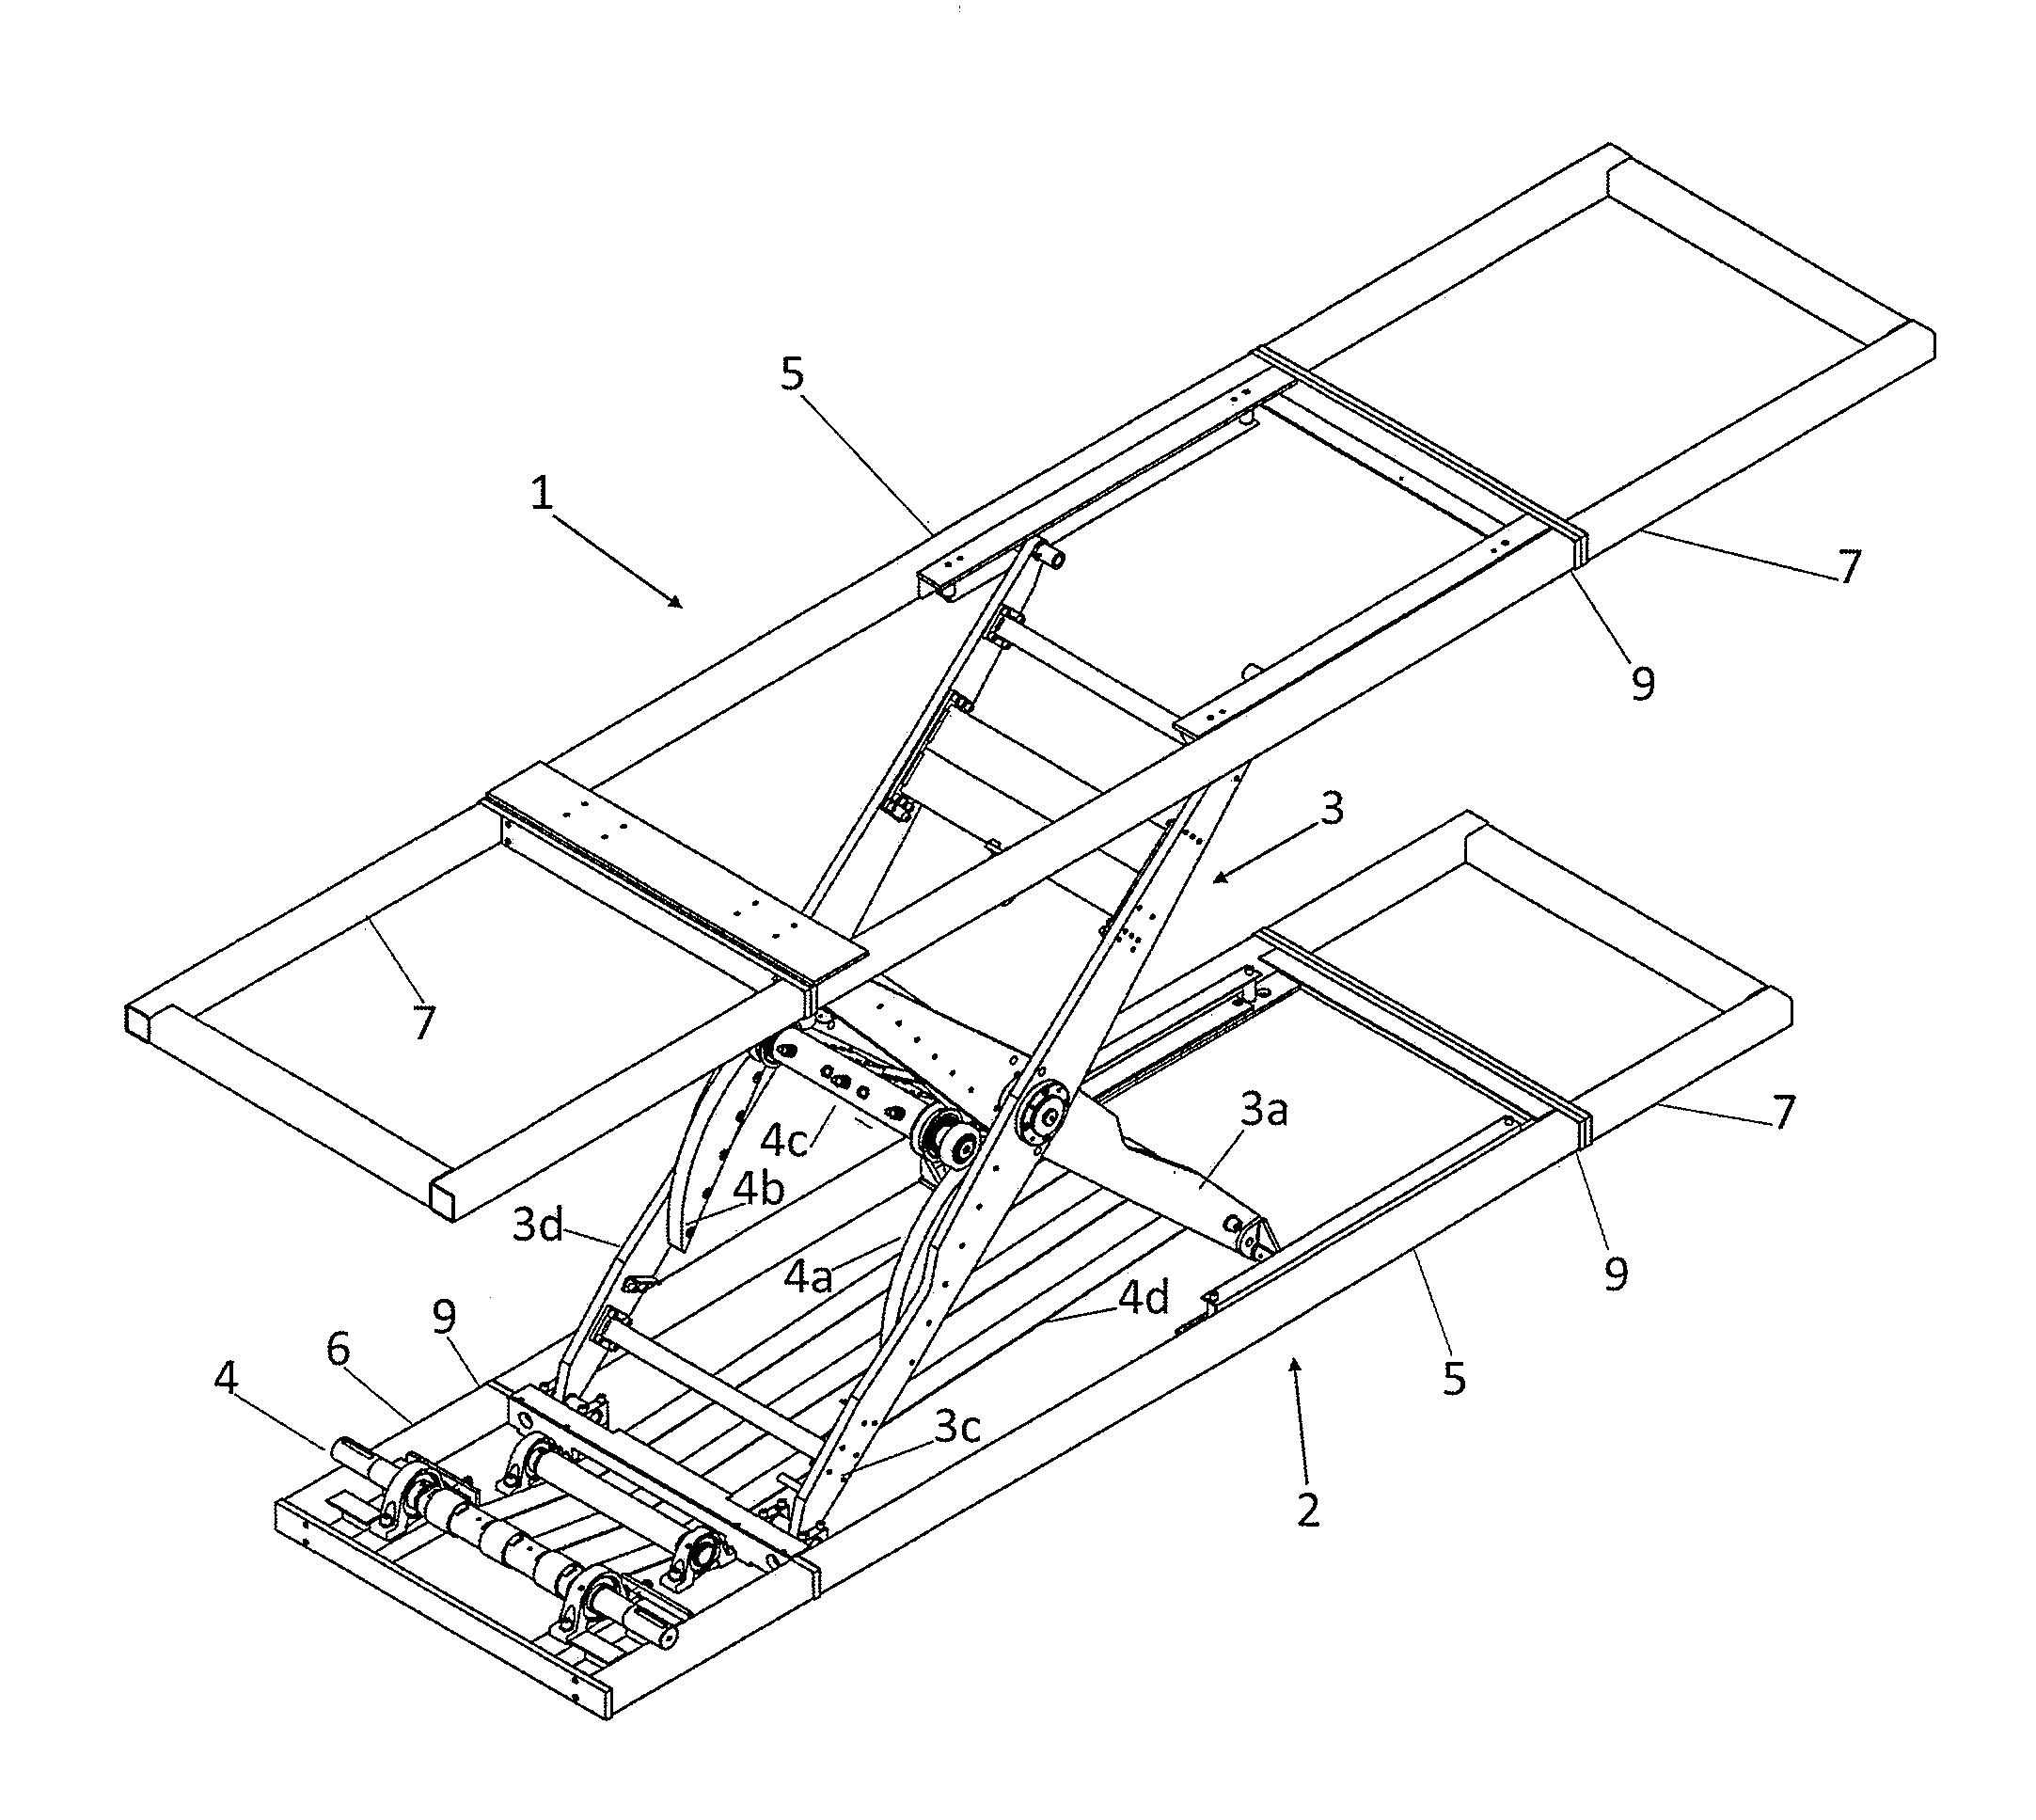 Scissors lifting table and method of assembling a scissors lifting table